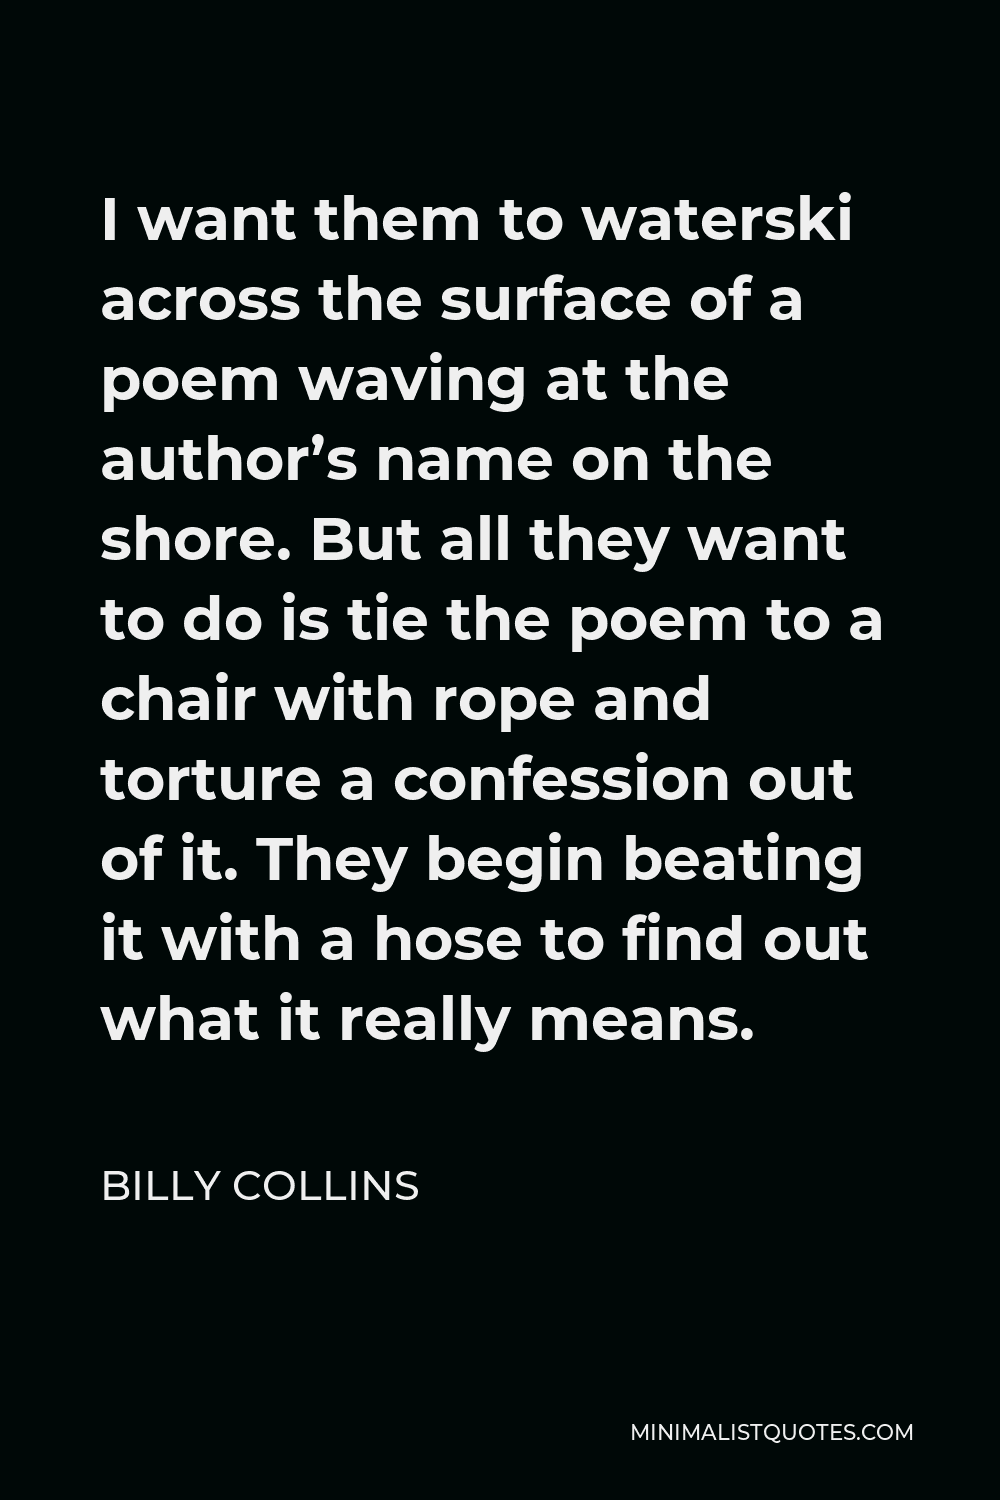 Billy Collins Quote - I want them to waterski across the surface of a poem waving at the author’s name on the shore. But all they want to do is tie the poem to a chair with rope and torture a confession out of it. They begin beating it with a hose to find out what it really means.